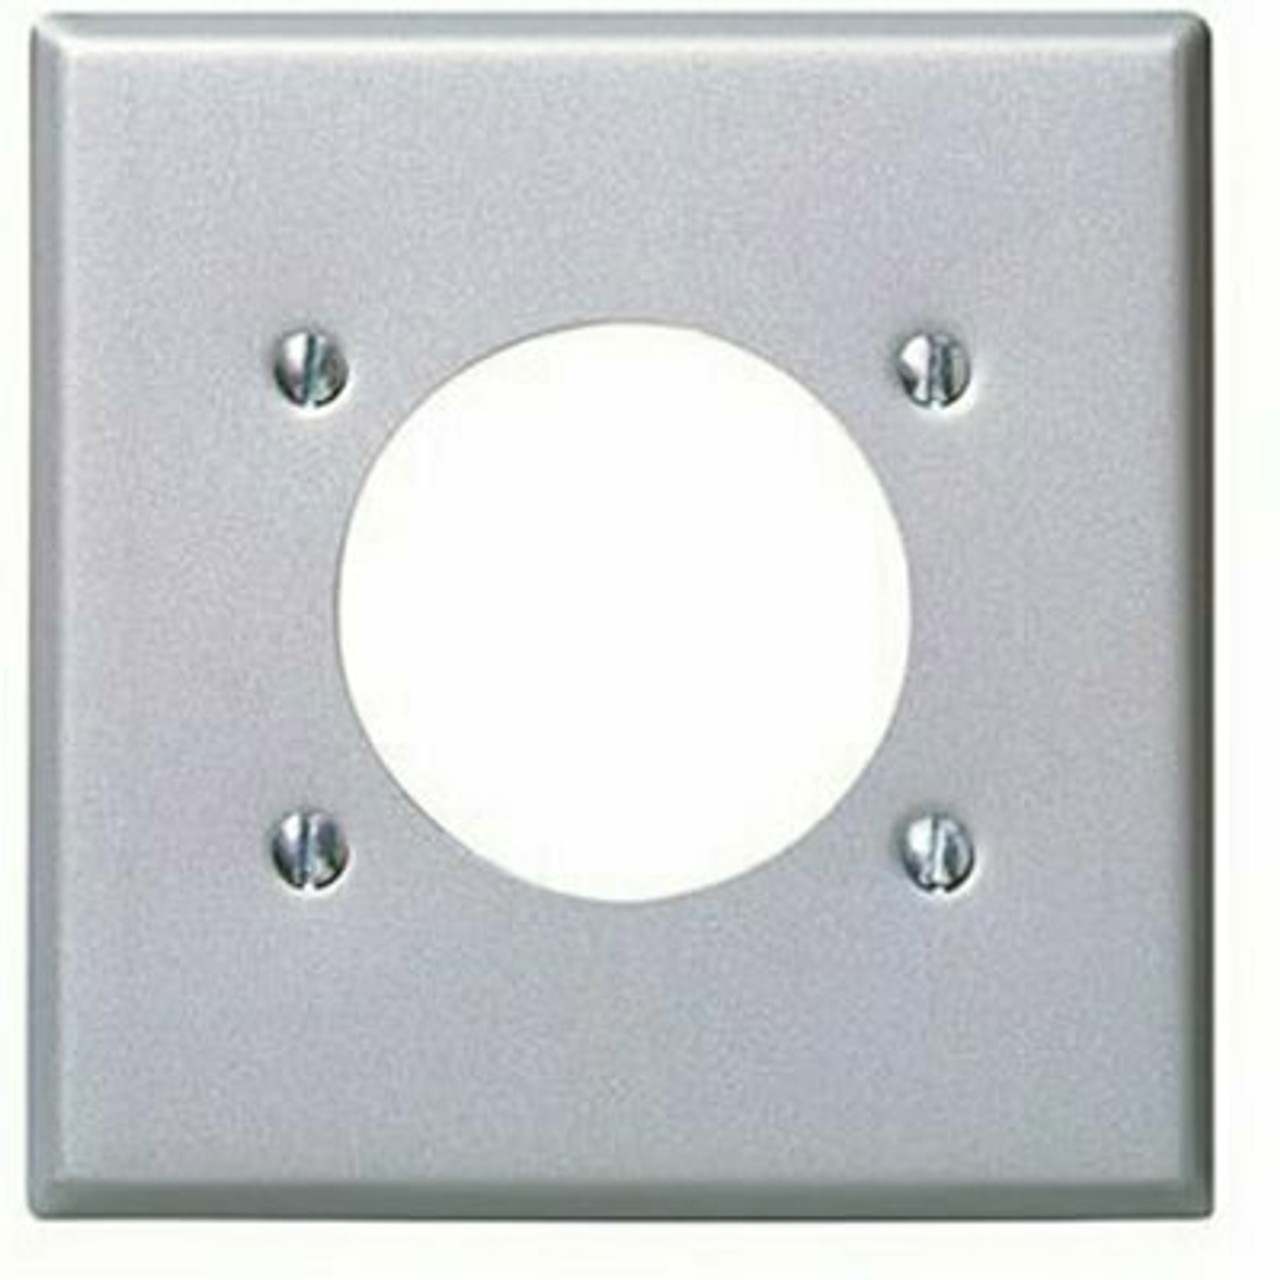 Leviton Stainless Steel 2-Gang Single Outlet Wall Plate (1-Pack)